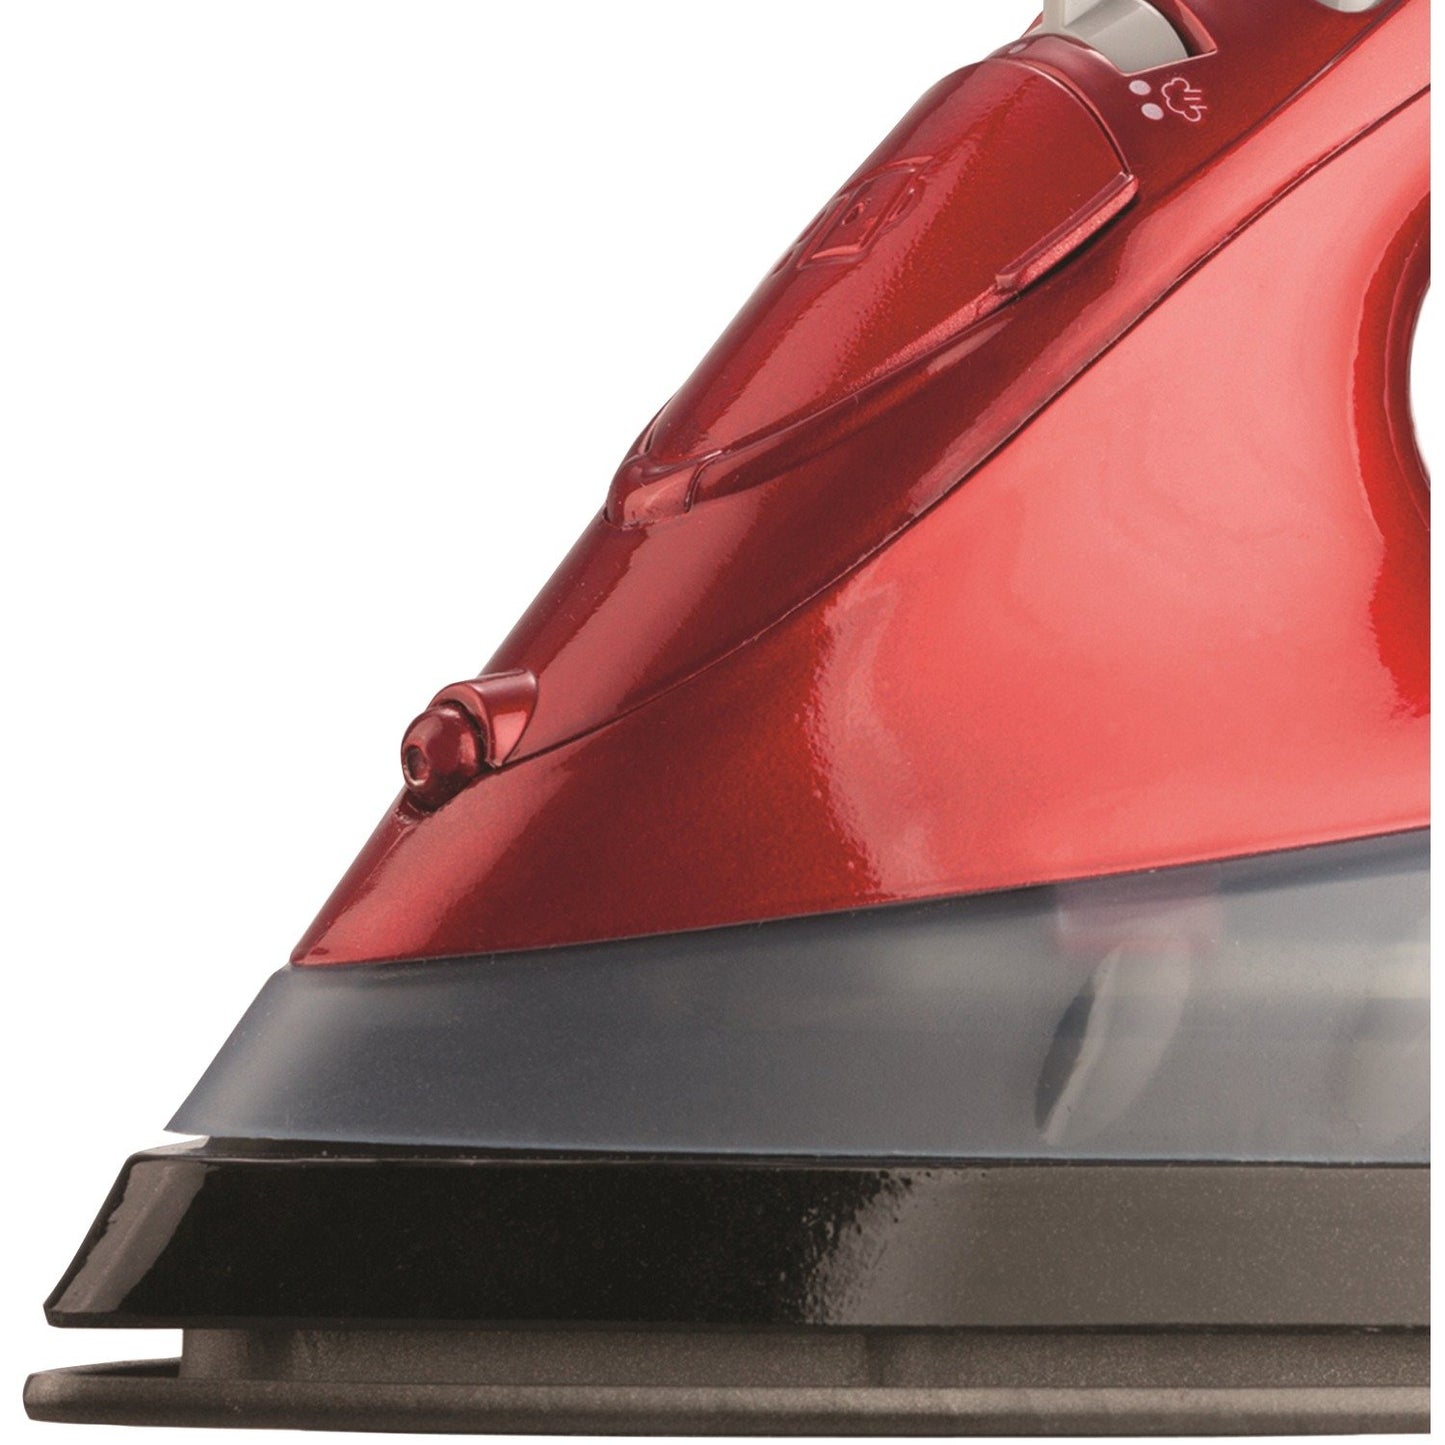 Brentwood Appl. MPI-61 Full-Size Nonstick Steam Iron (Red)